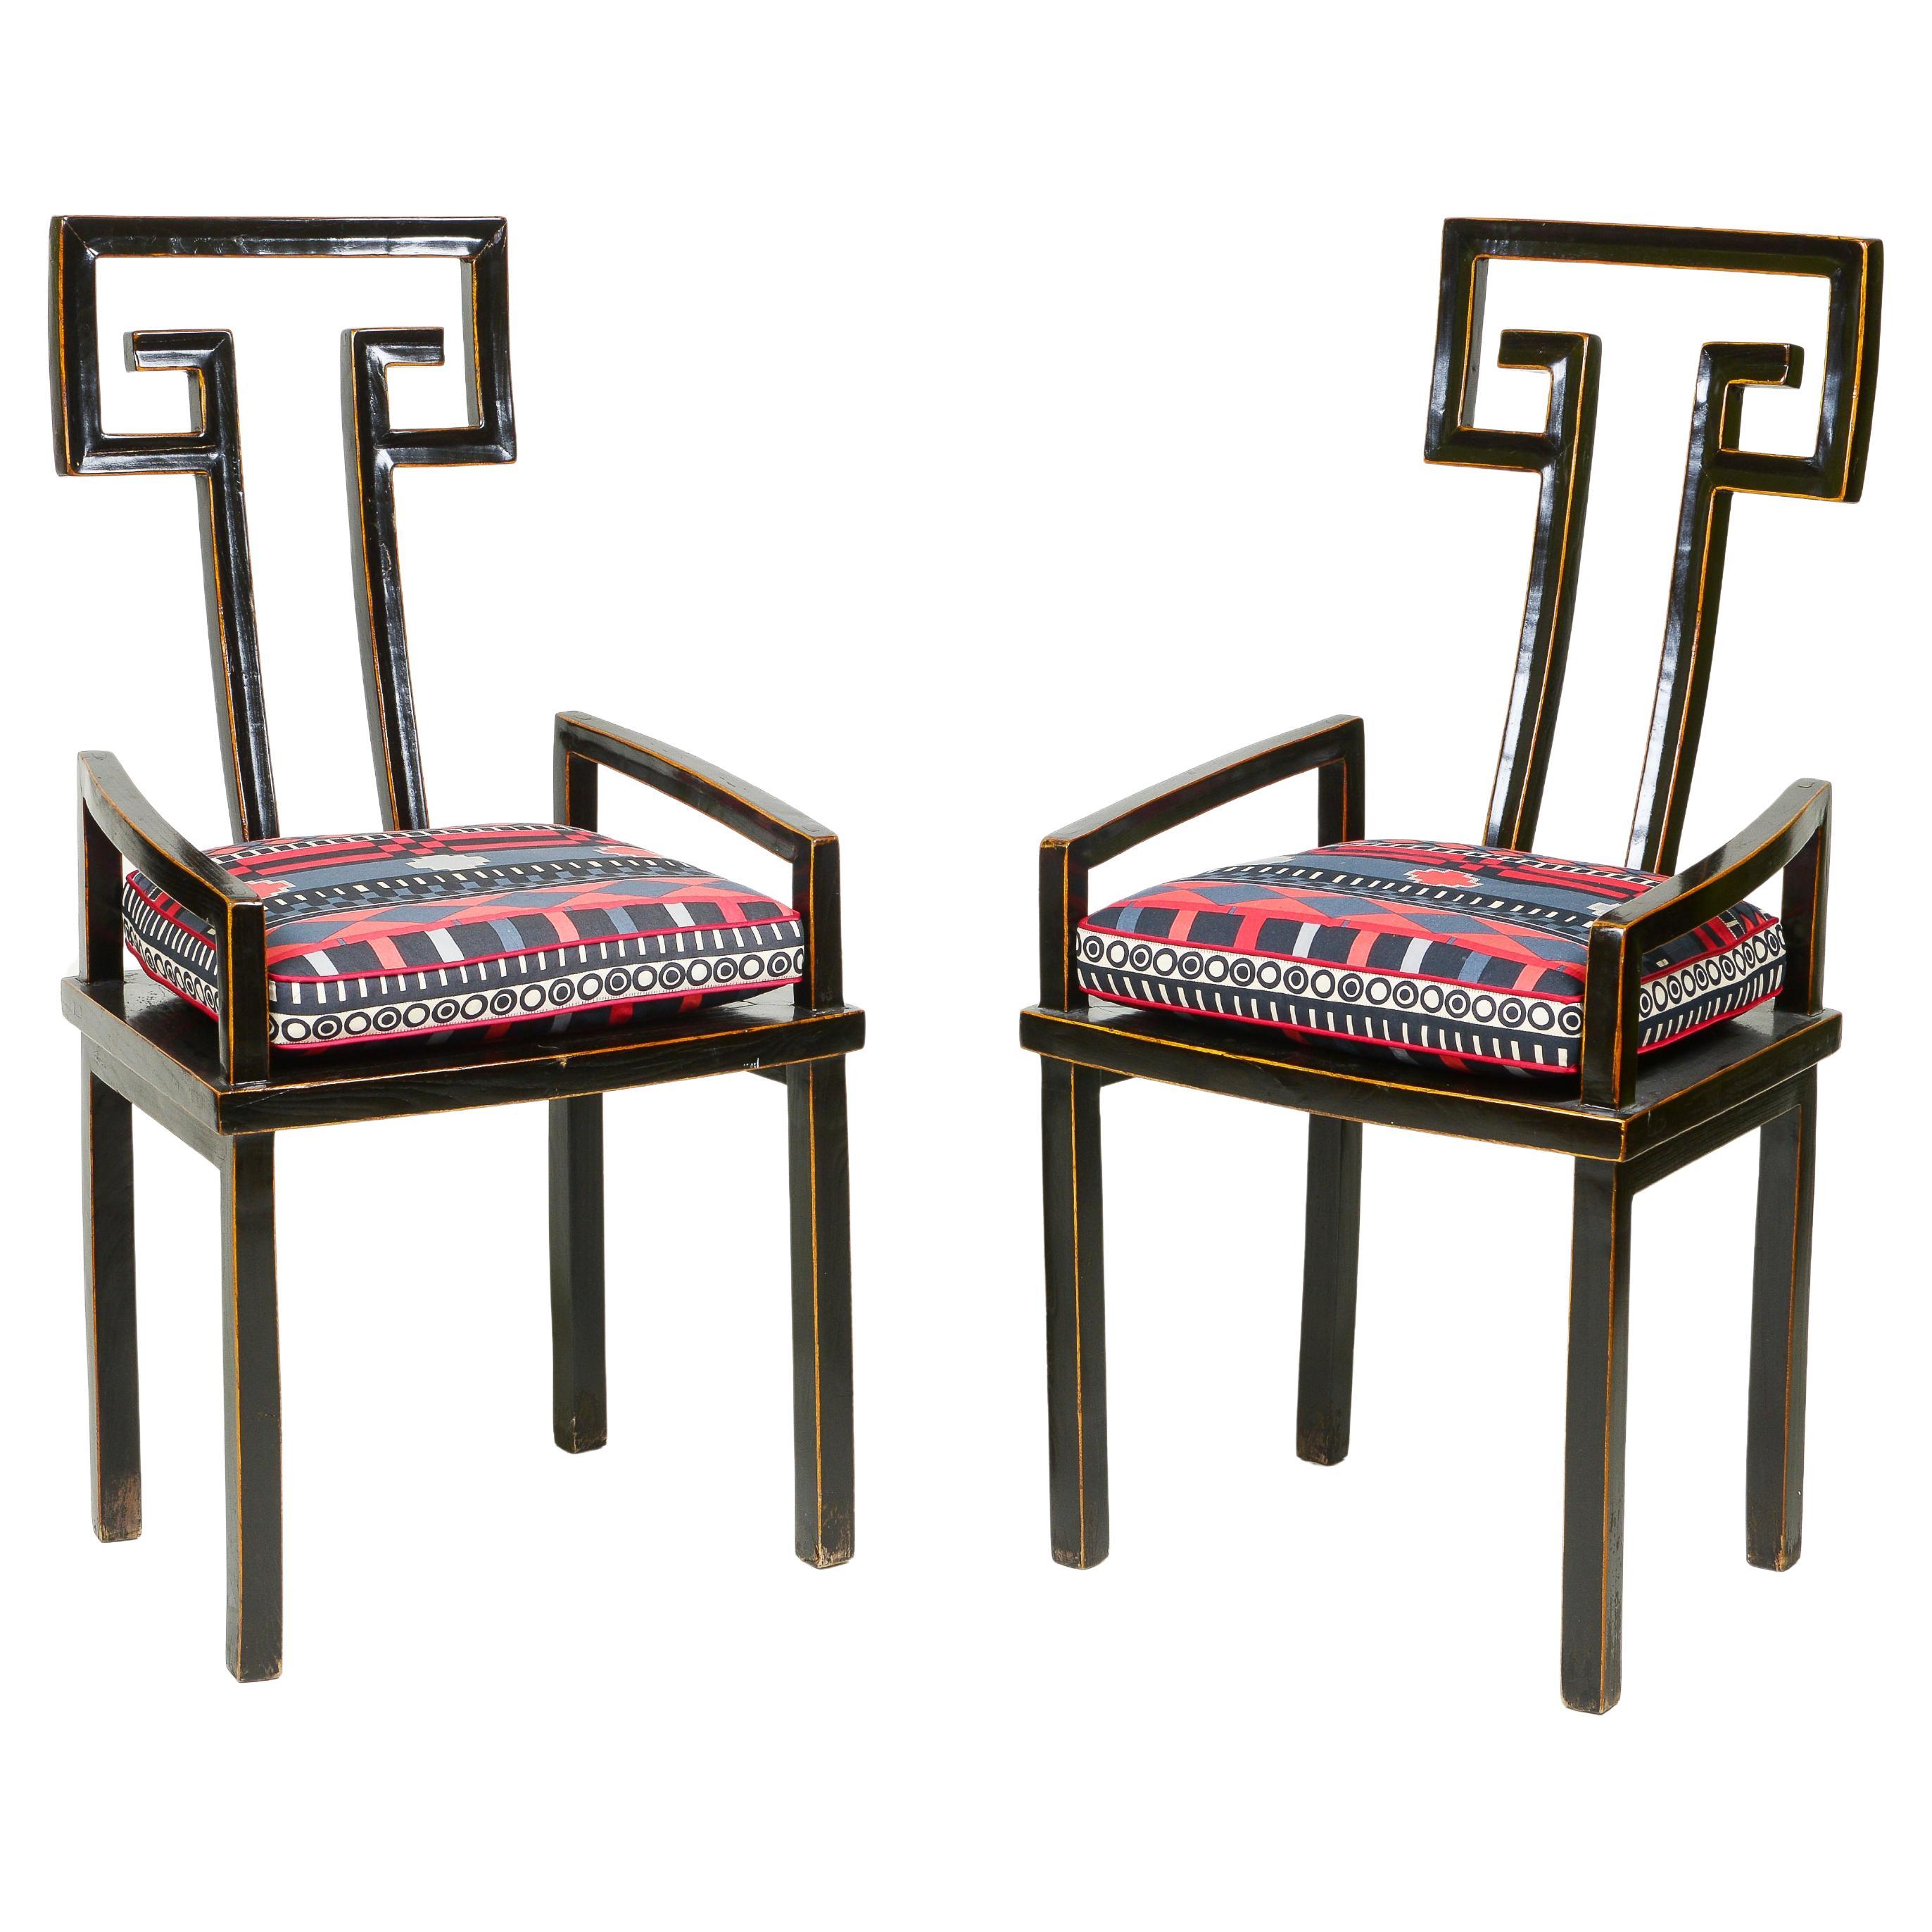 A Pair of Chinese Black Lacquer Armchairs